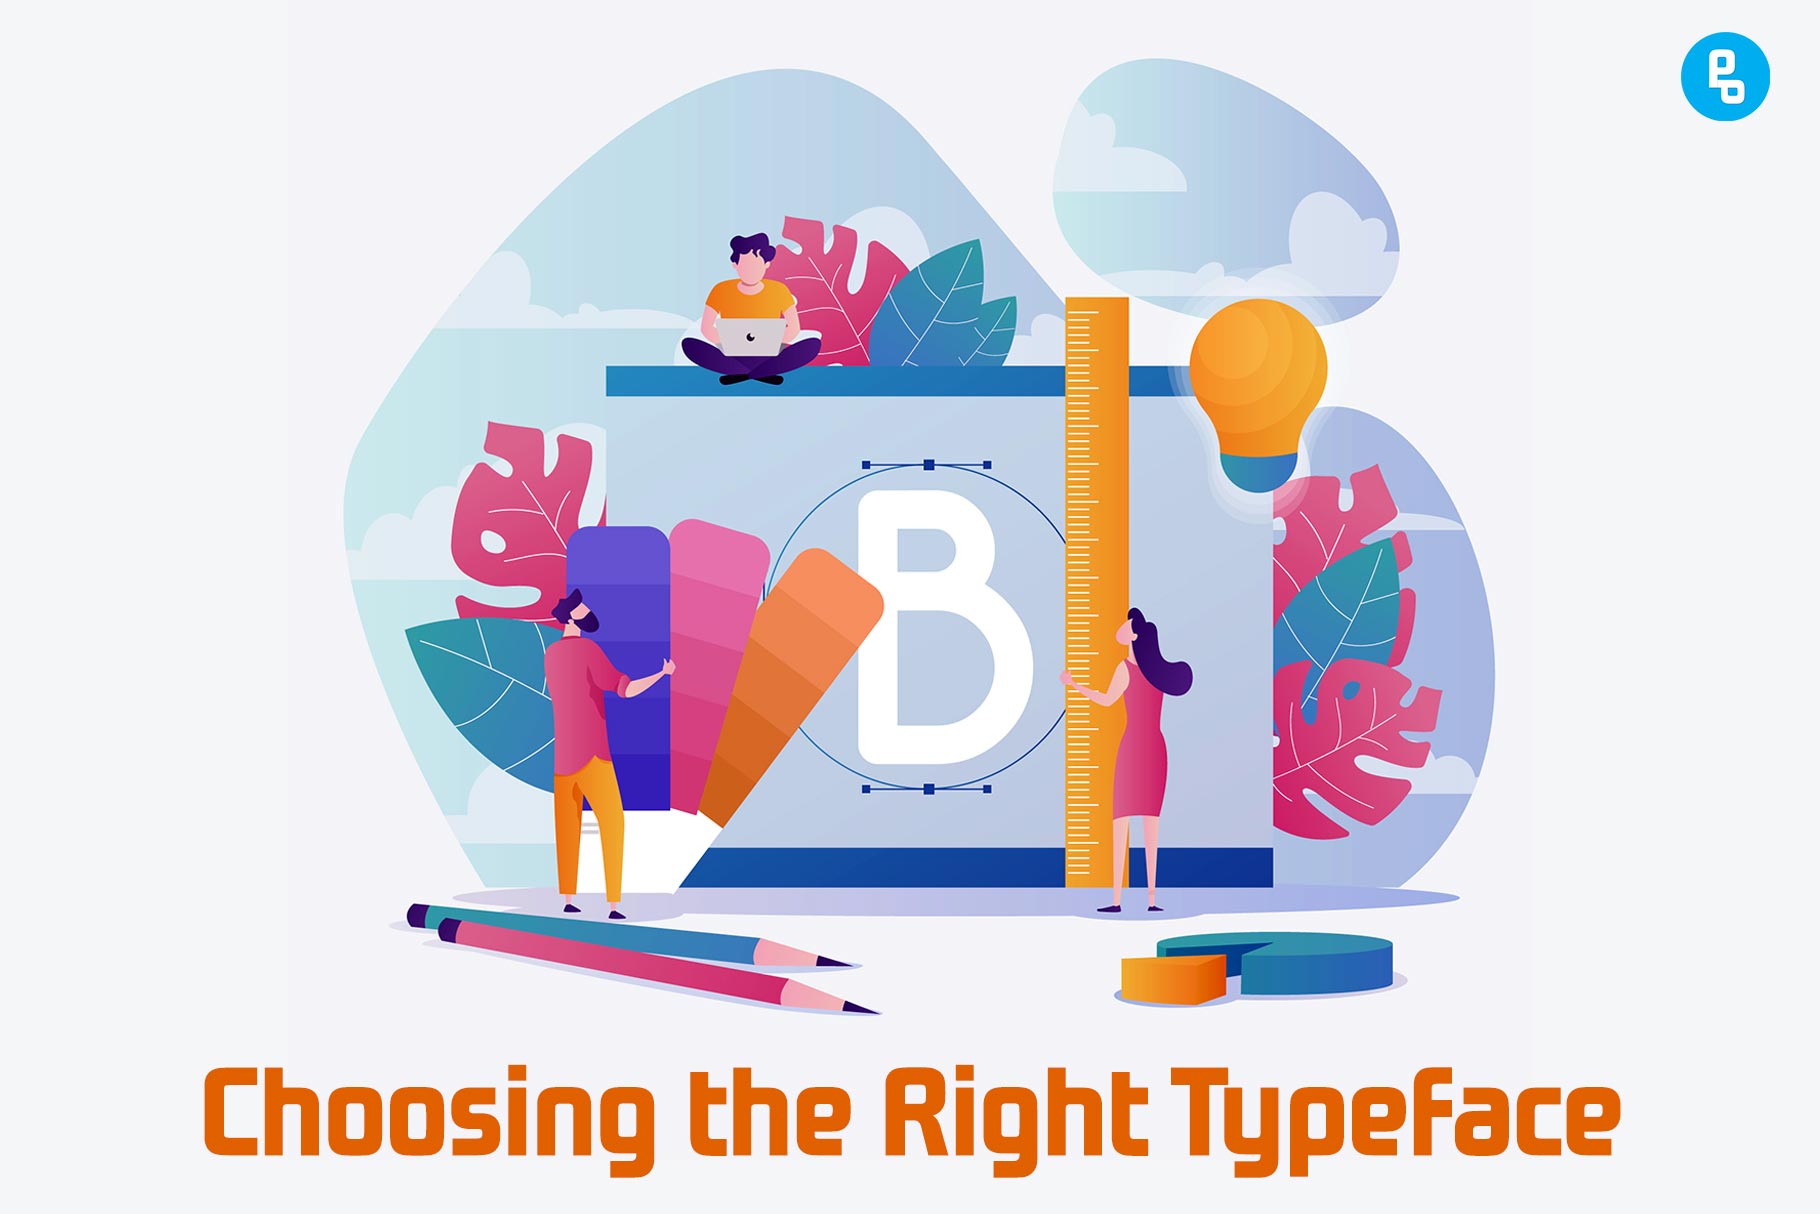 In this article, We'll show you how choosing the right typeface affects all these different aspects of design and branding.